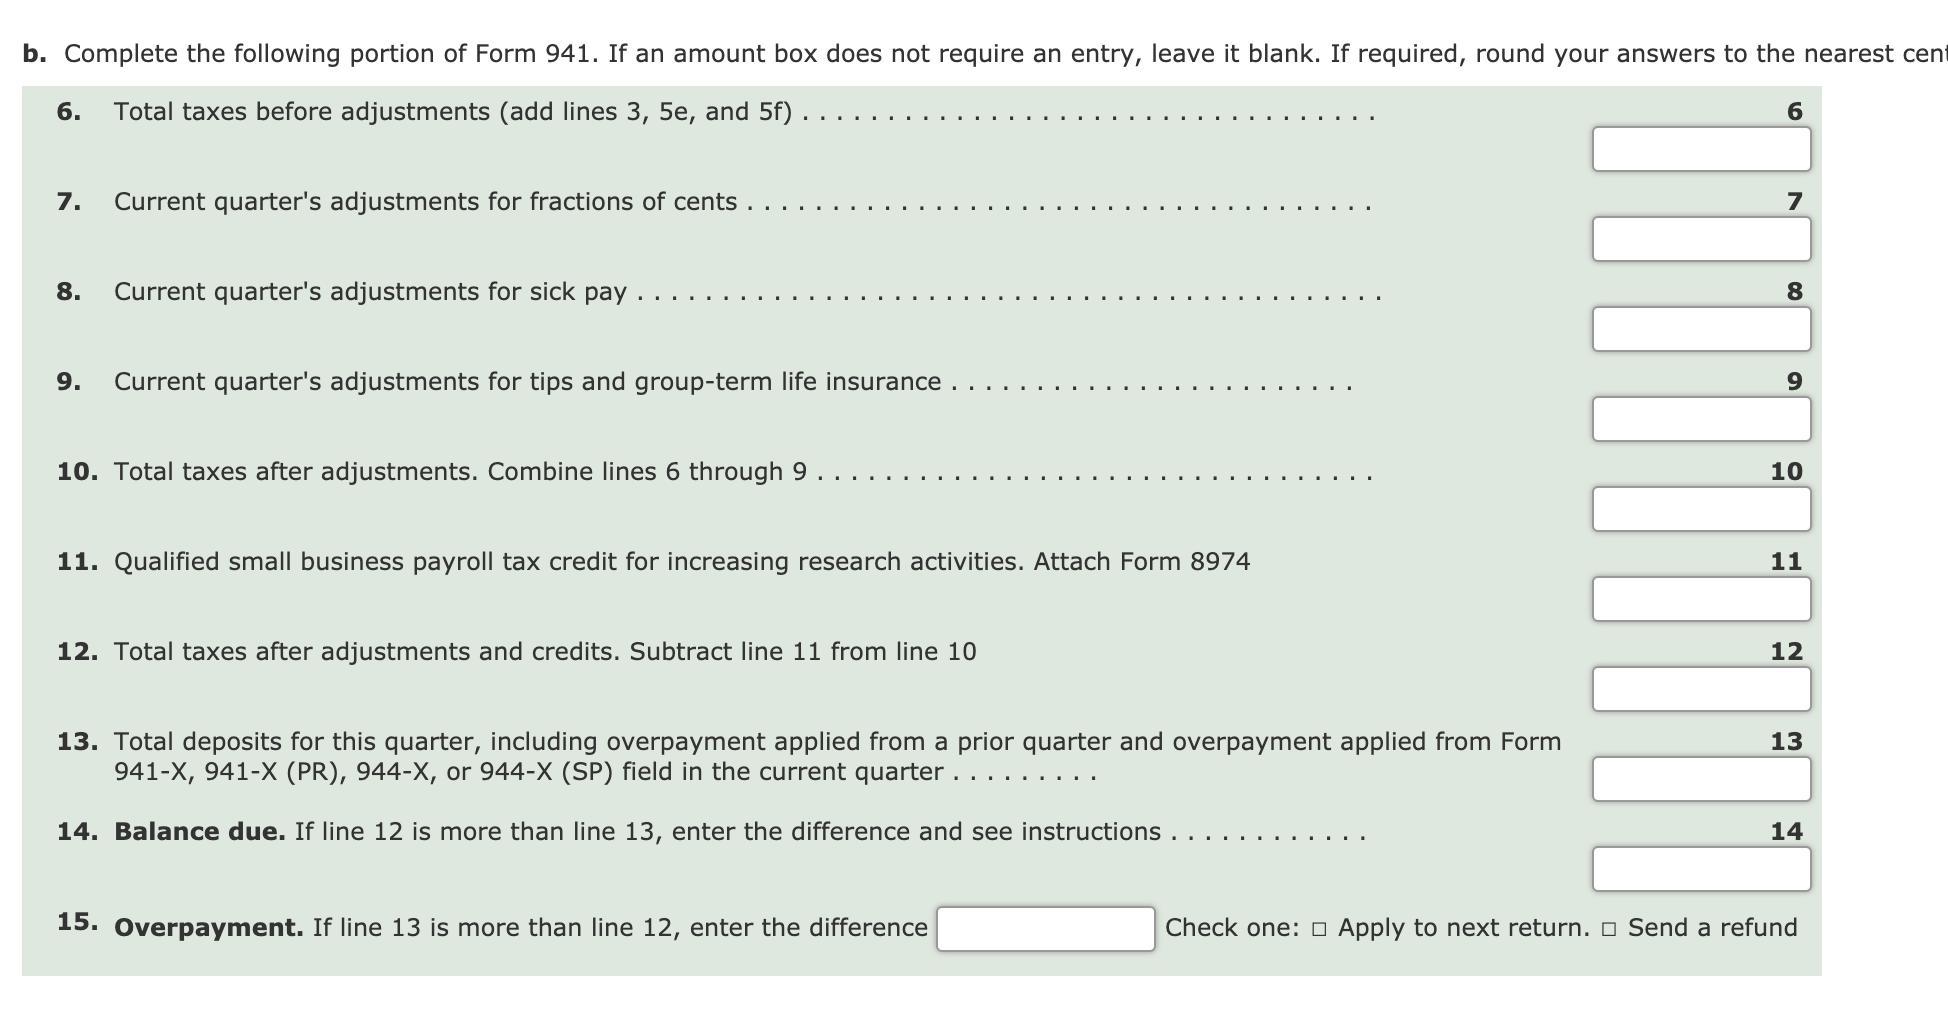 b. Complete the following portion of Form 941. If an amount box does not require an entry, leave it blank. If required, round